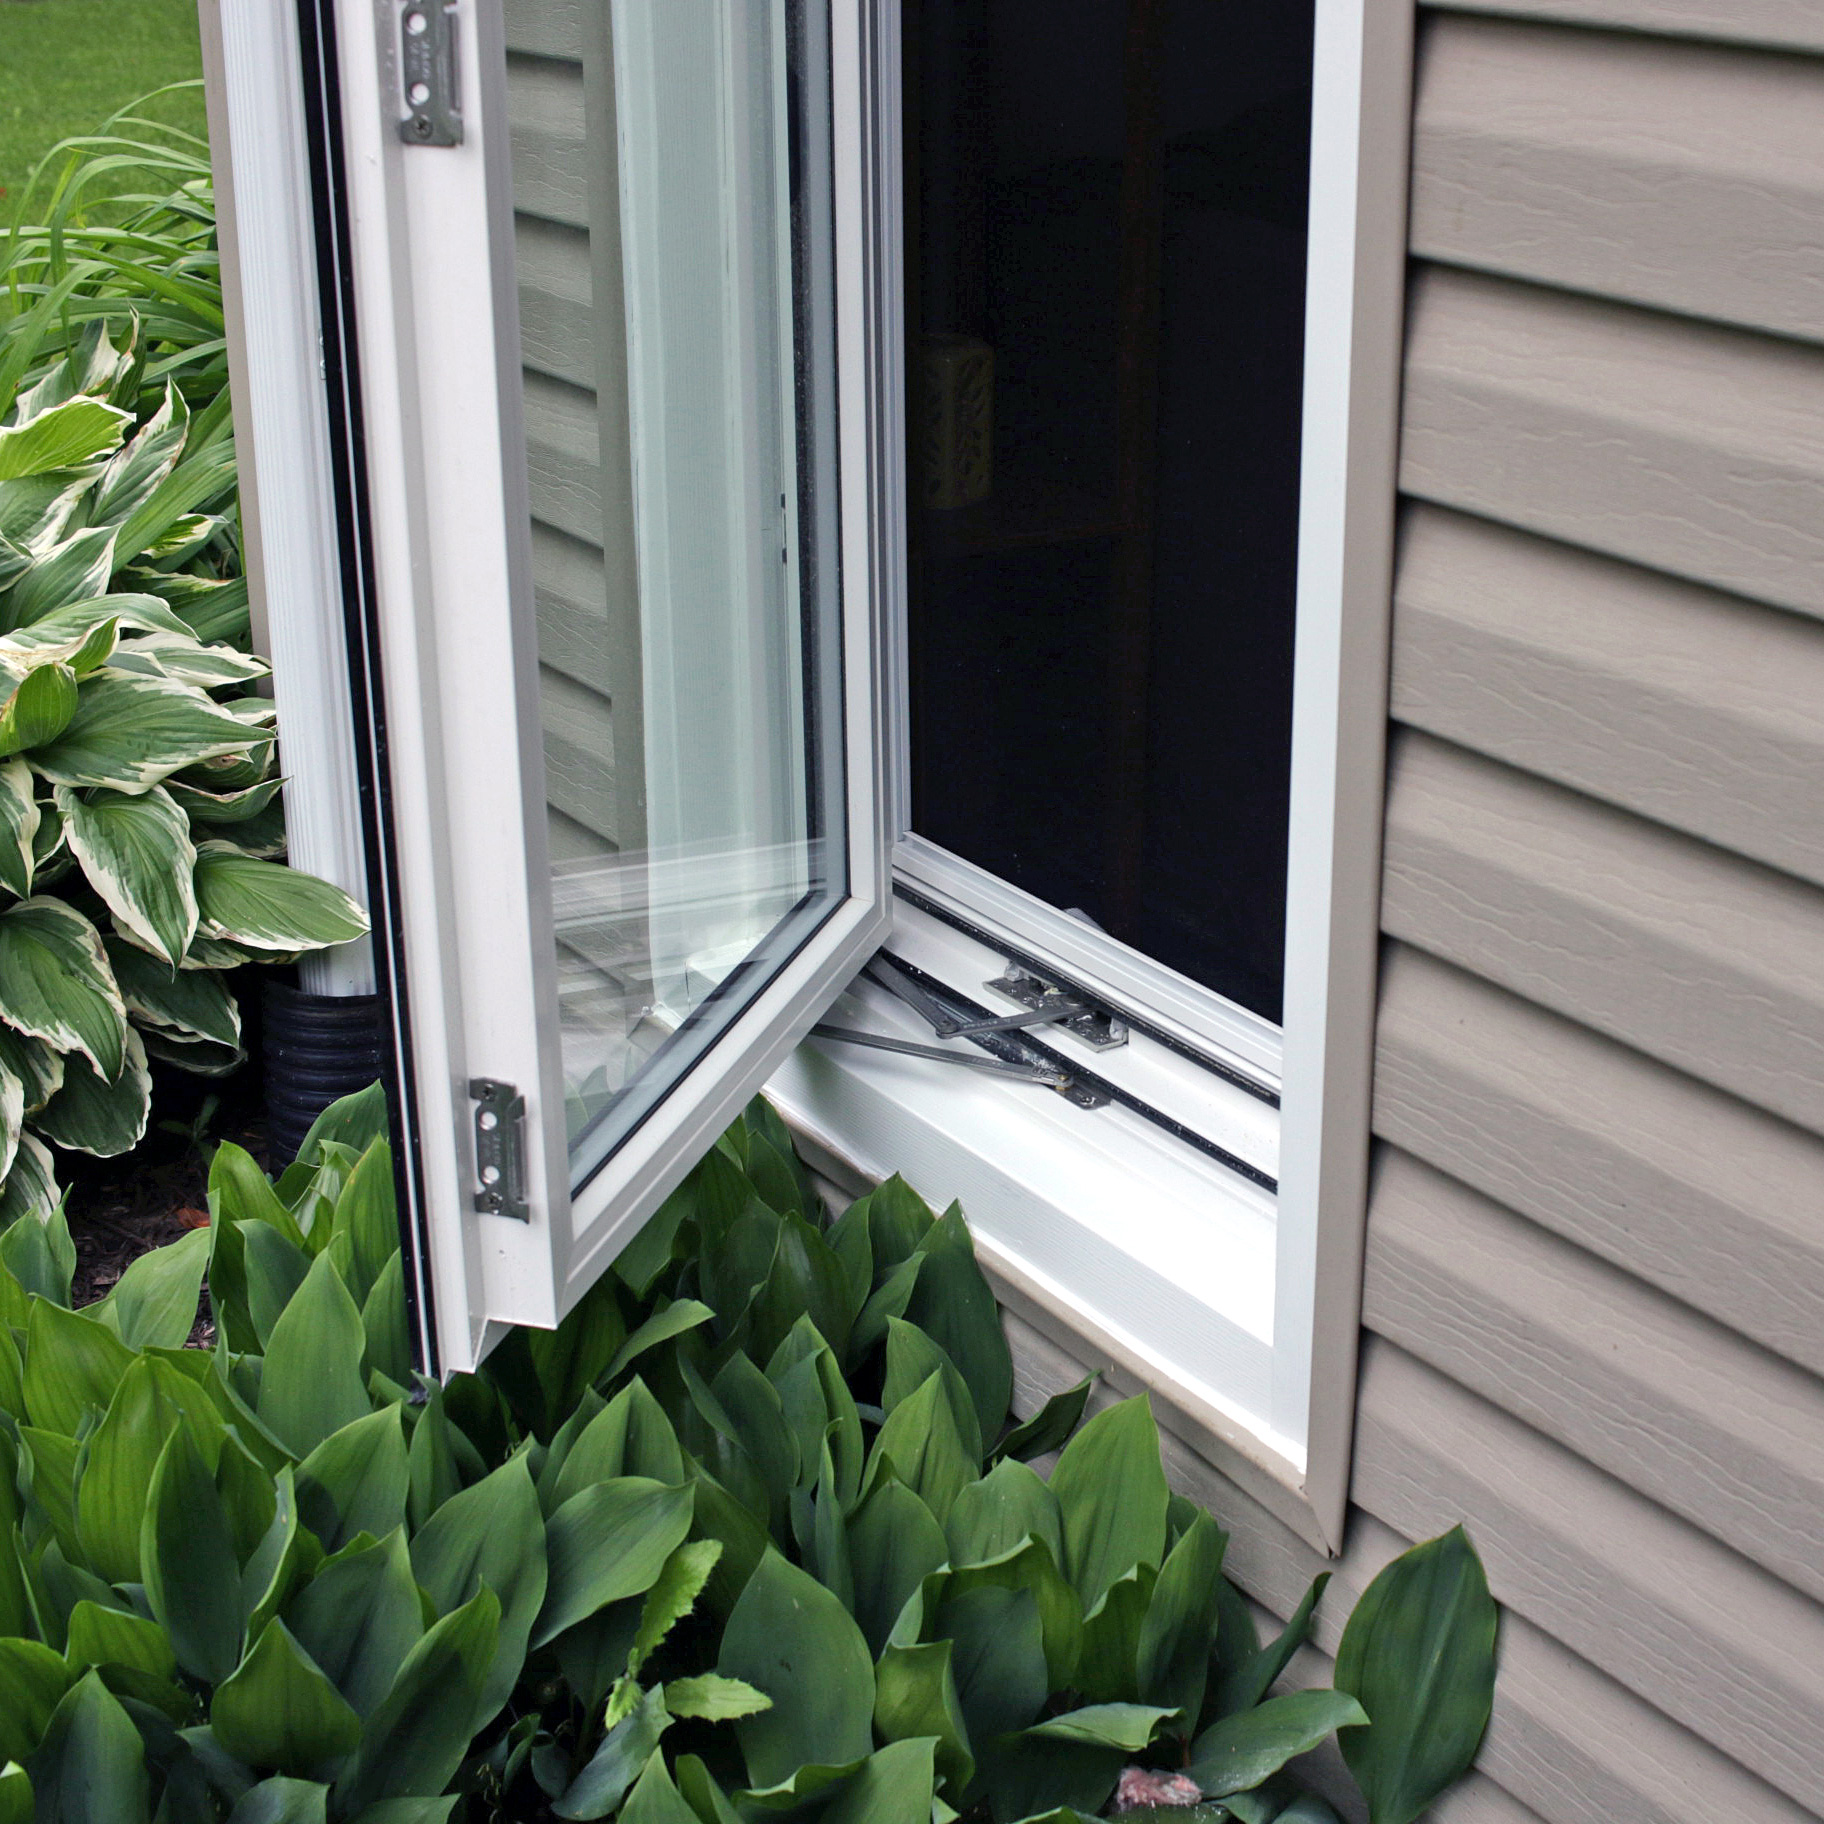 70 percent of energy loss occurs in windows and doors